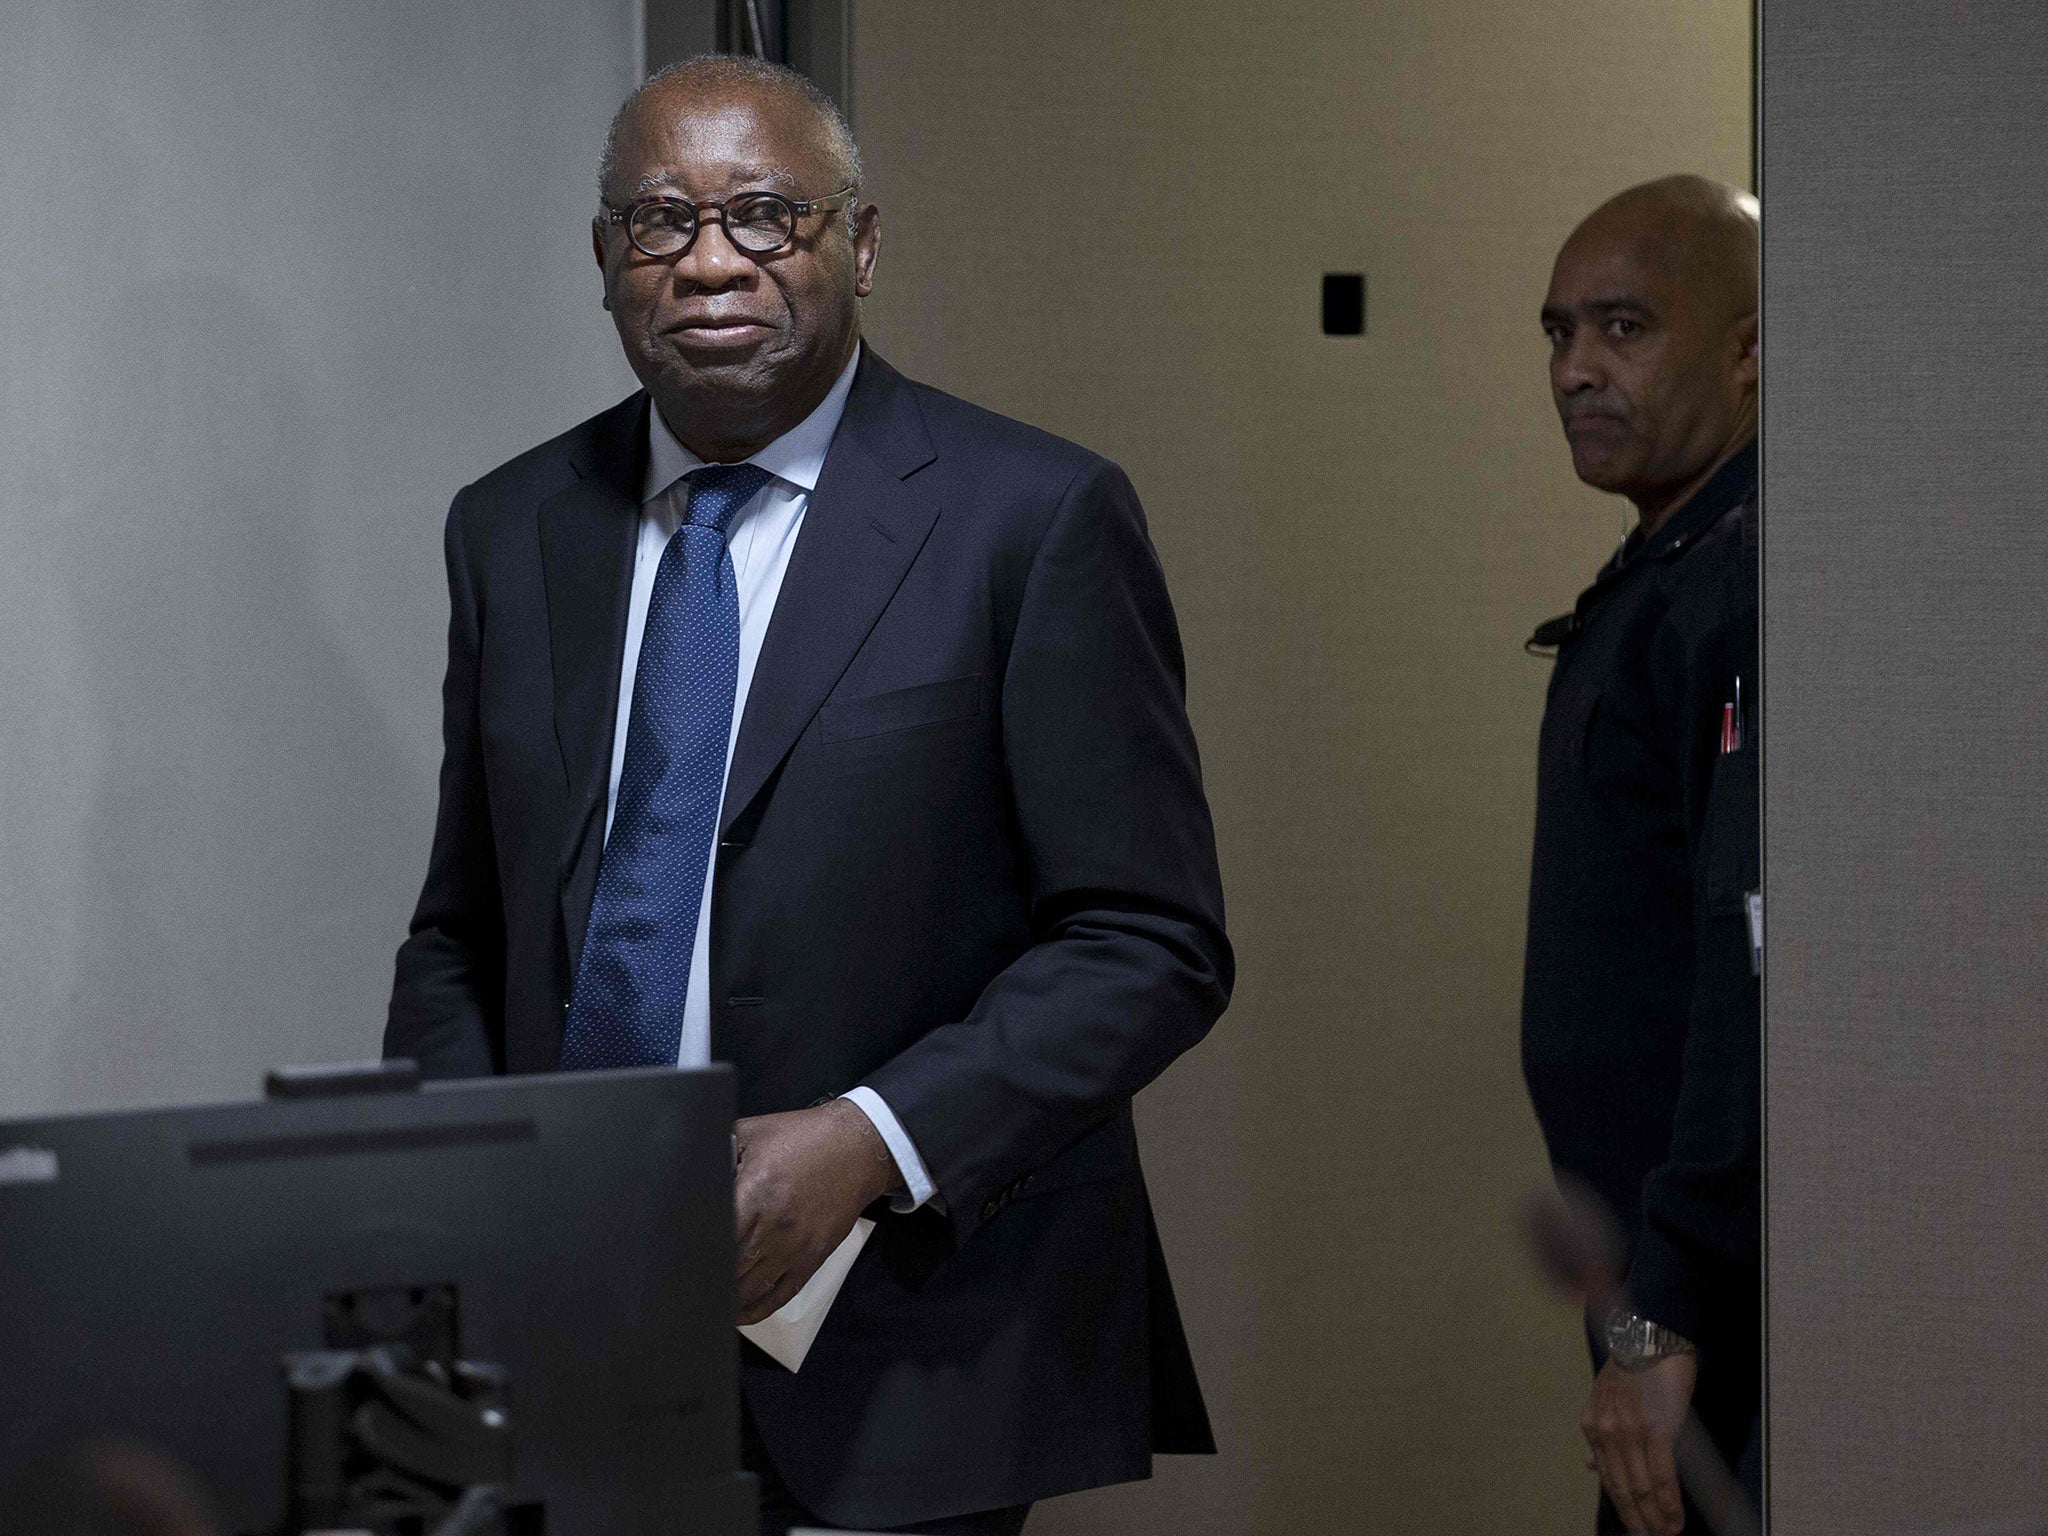 Former Ivory Coast President Laurent Gbagbo at the start of his trial in The Hague